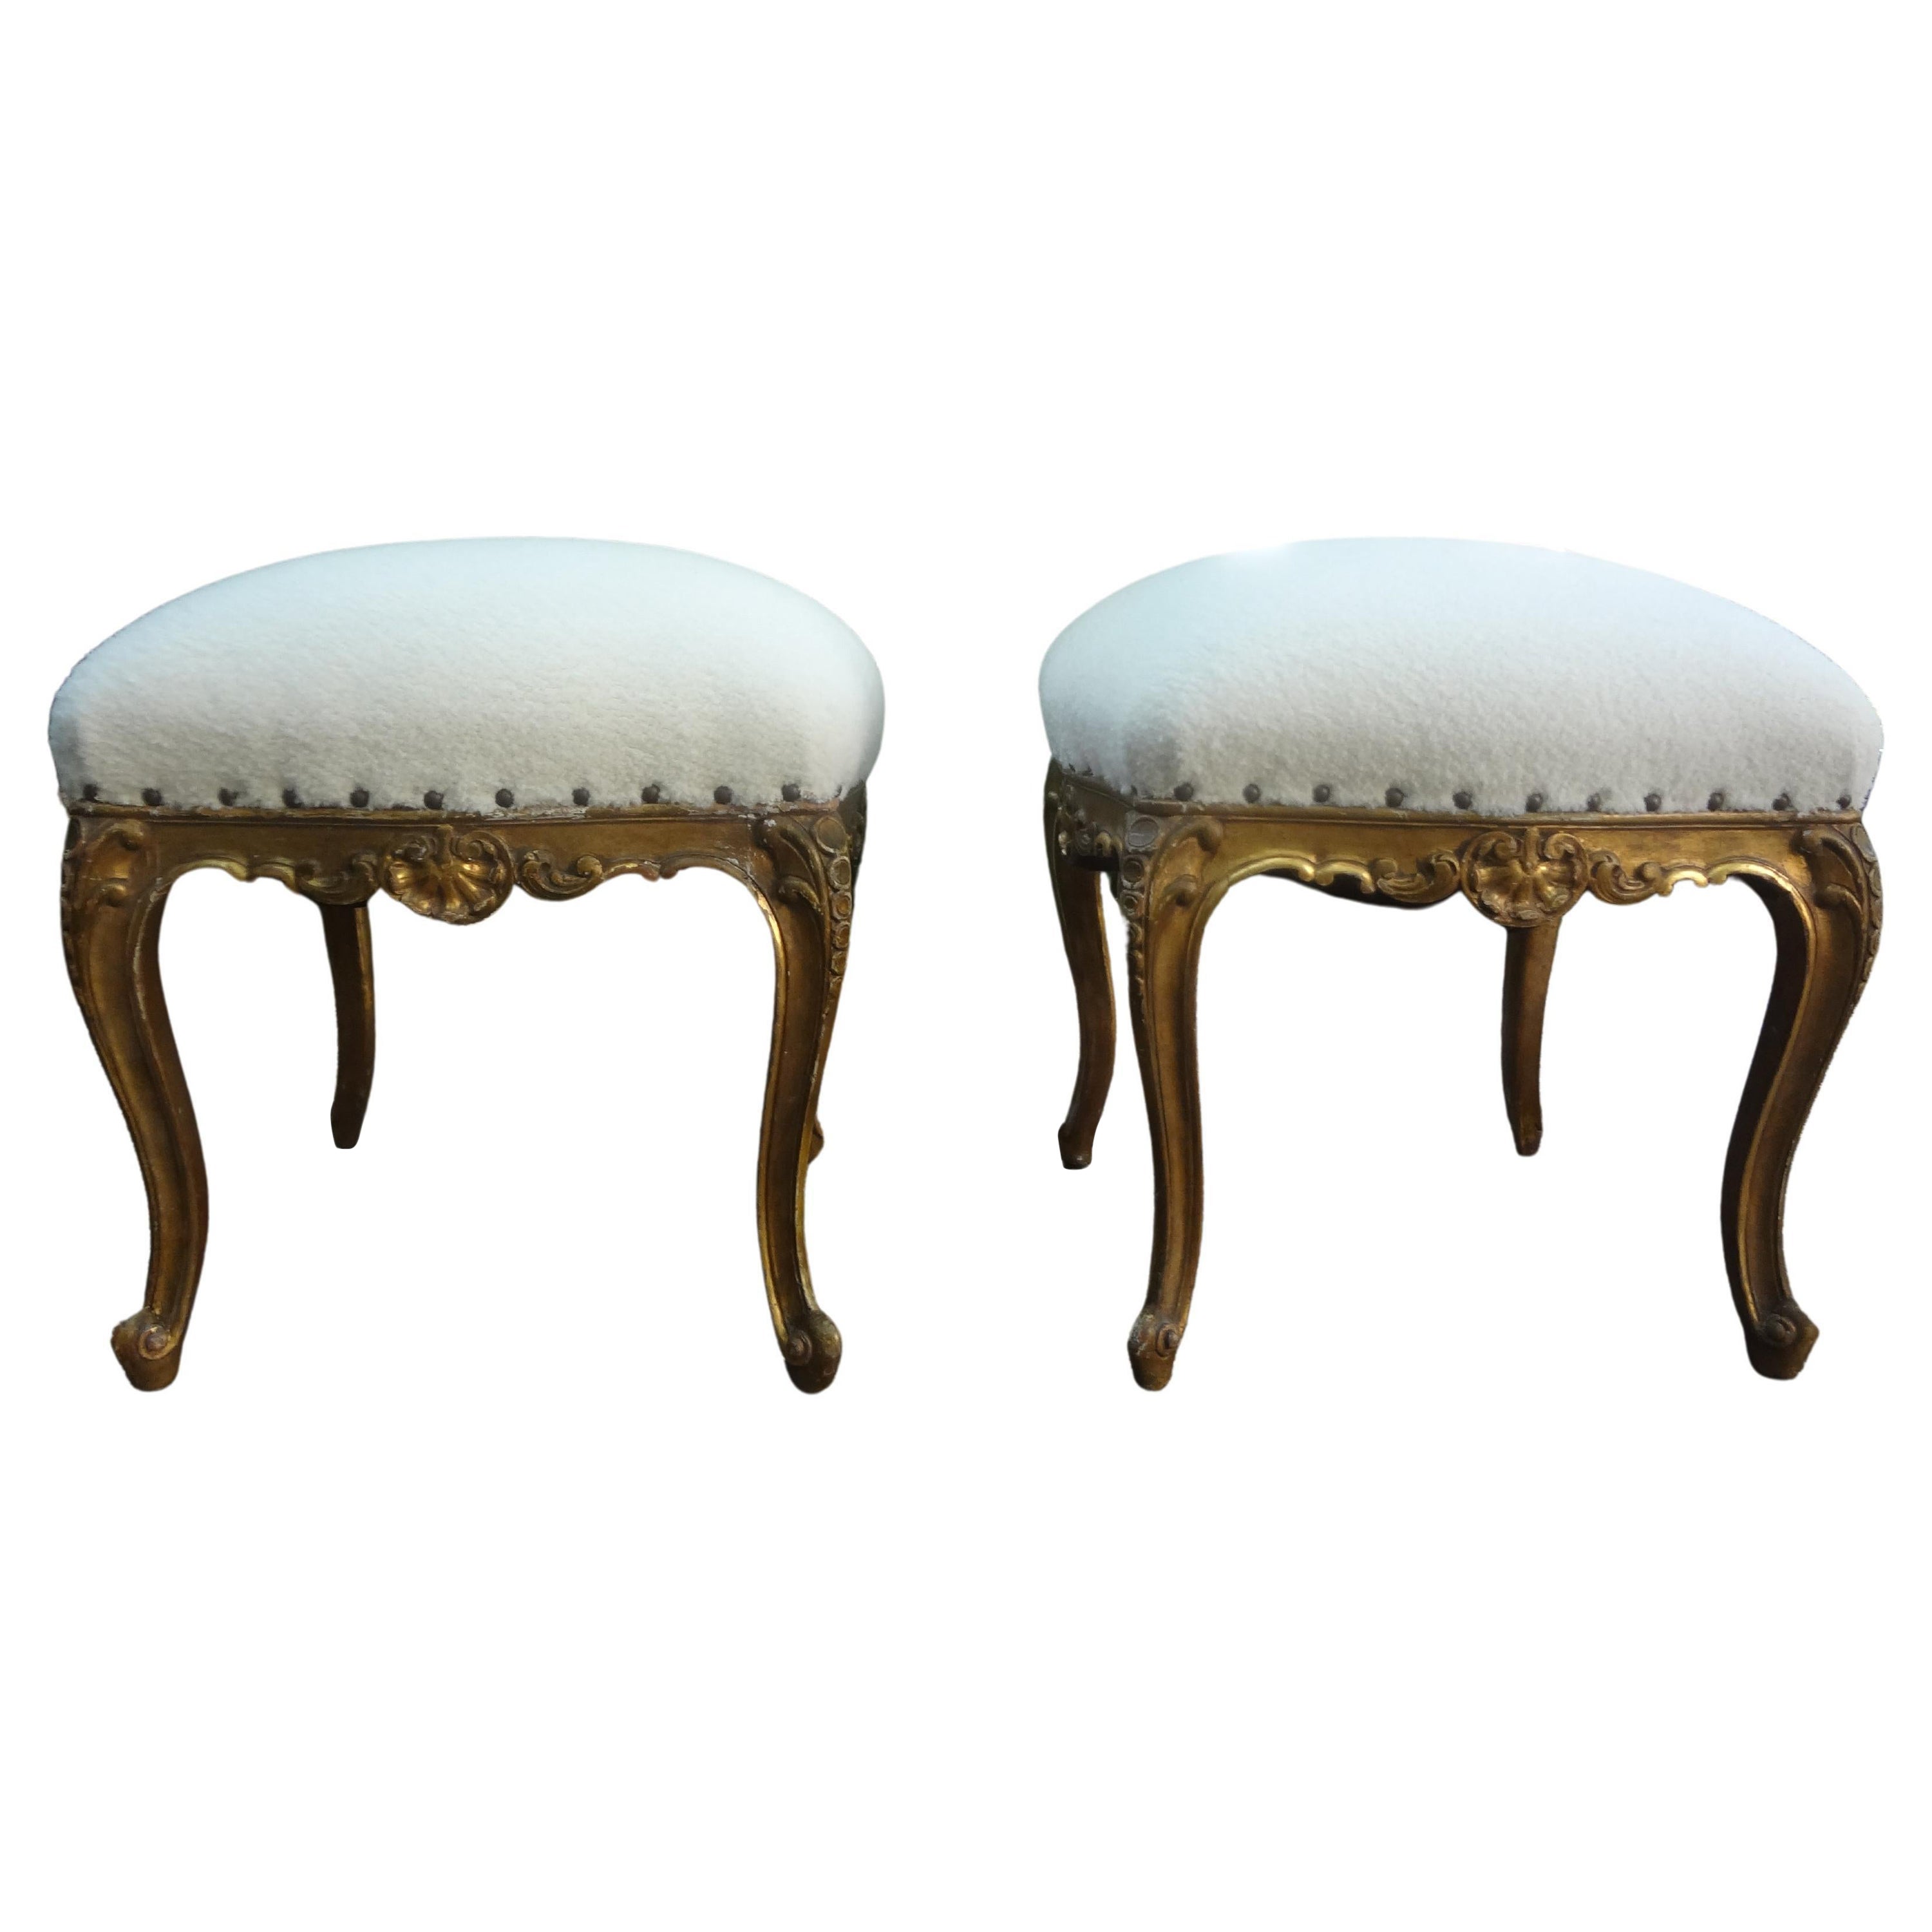 Pair Of 19th Century French Regence Style Giltwood Ottomans Or Benches